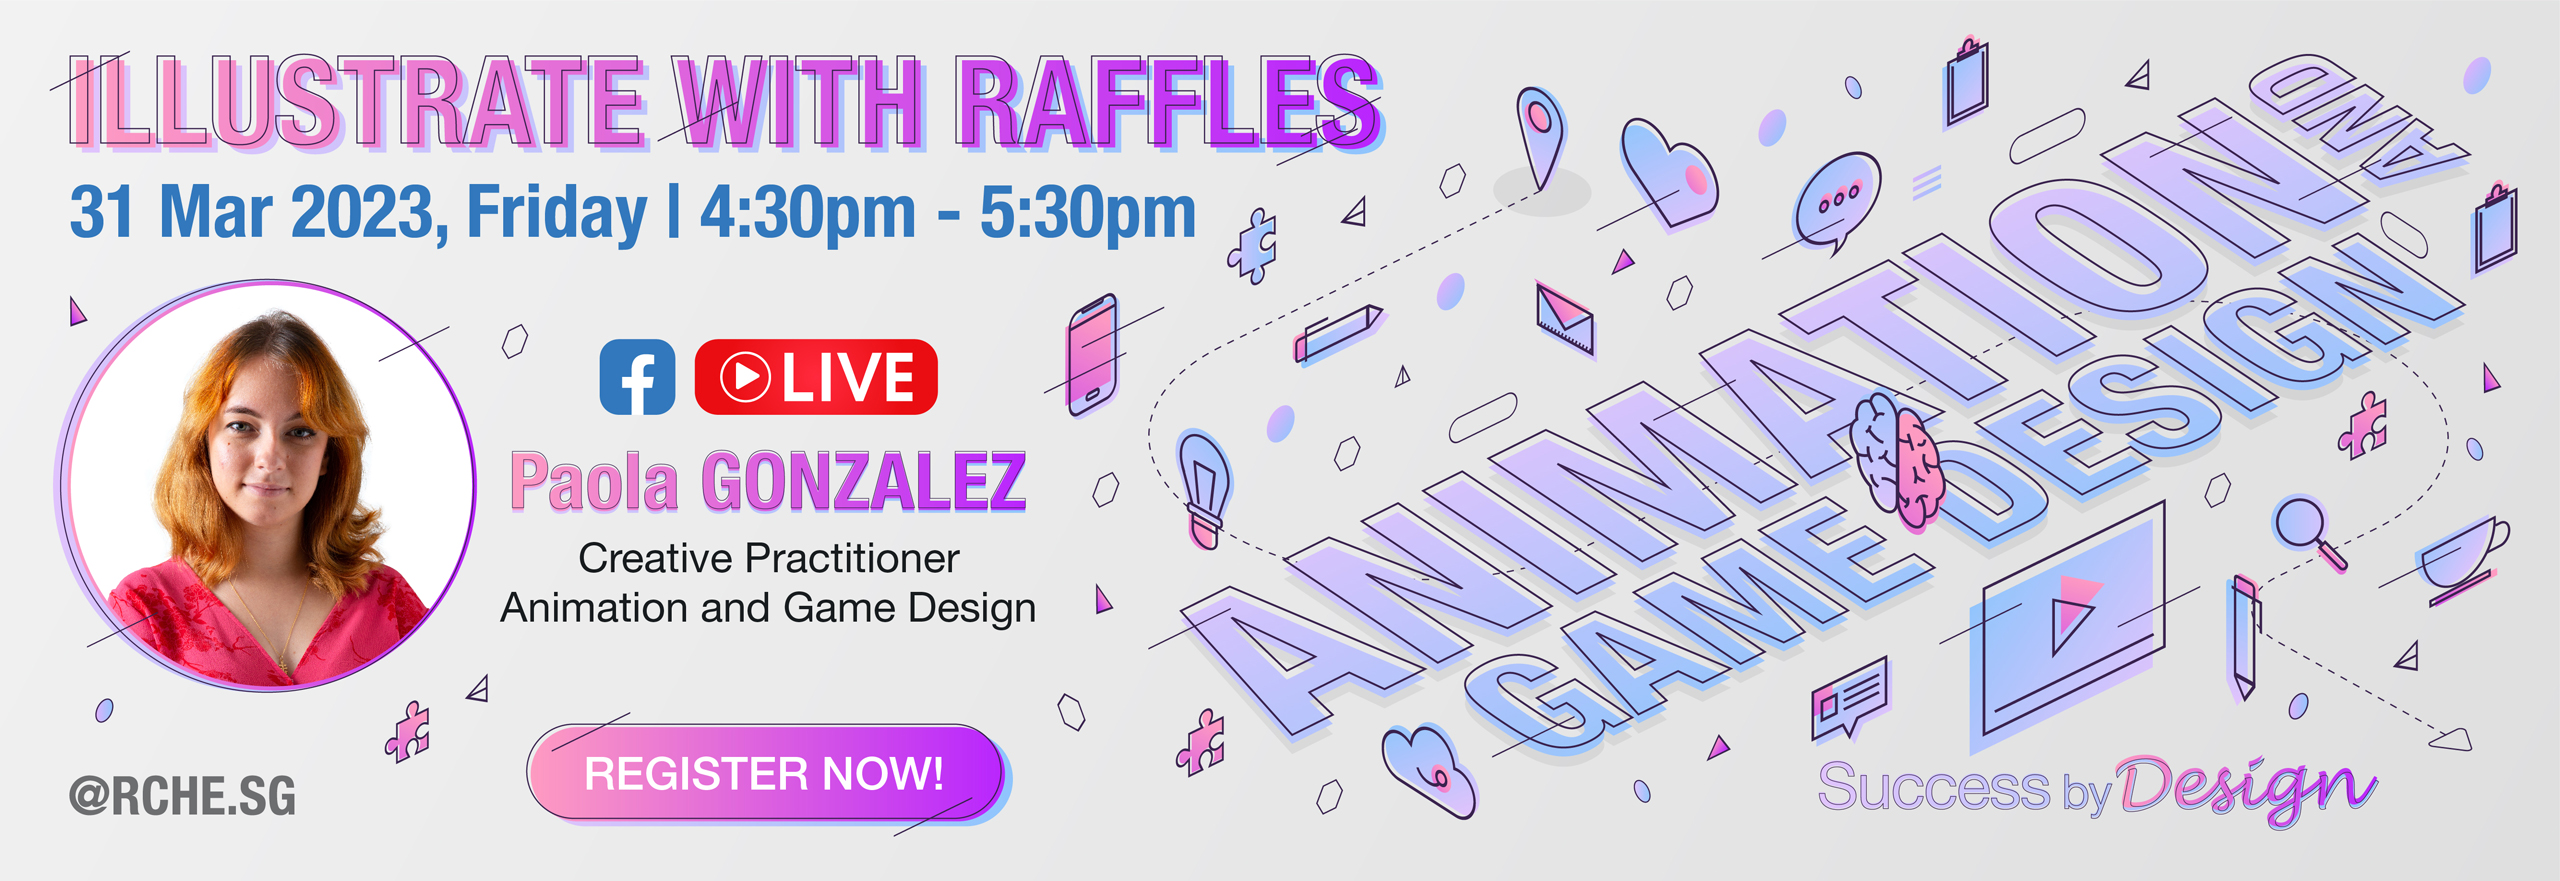 Illustrate with Raffles 31 March 2023 Livestream Microsite Banner